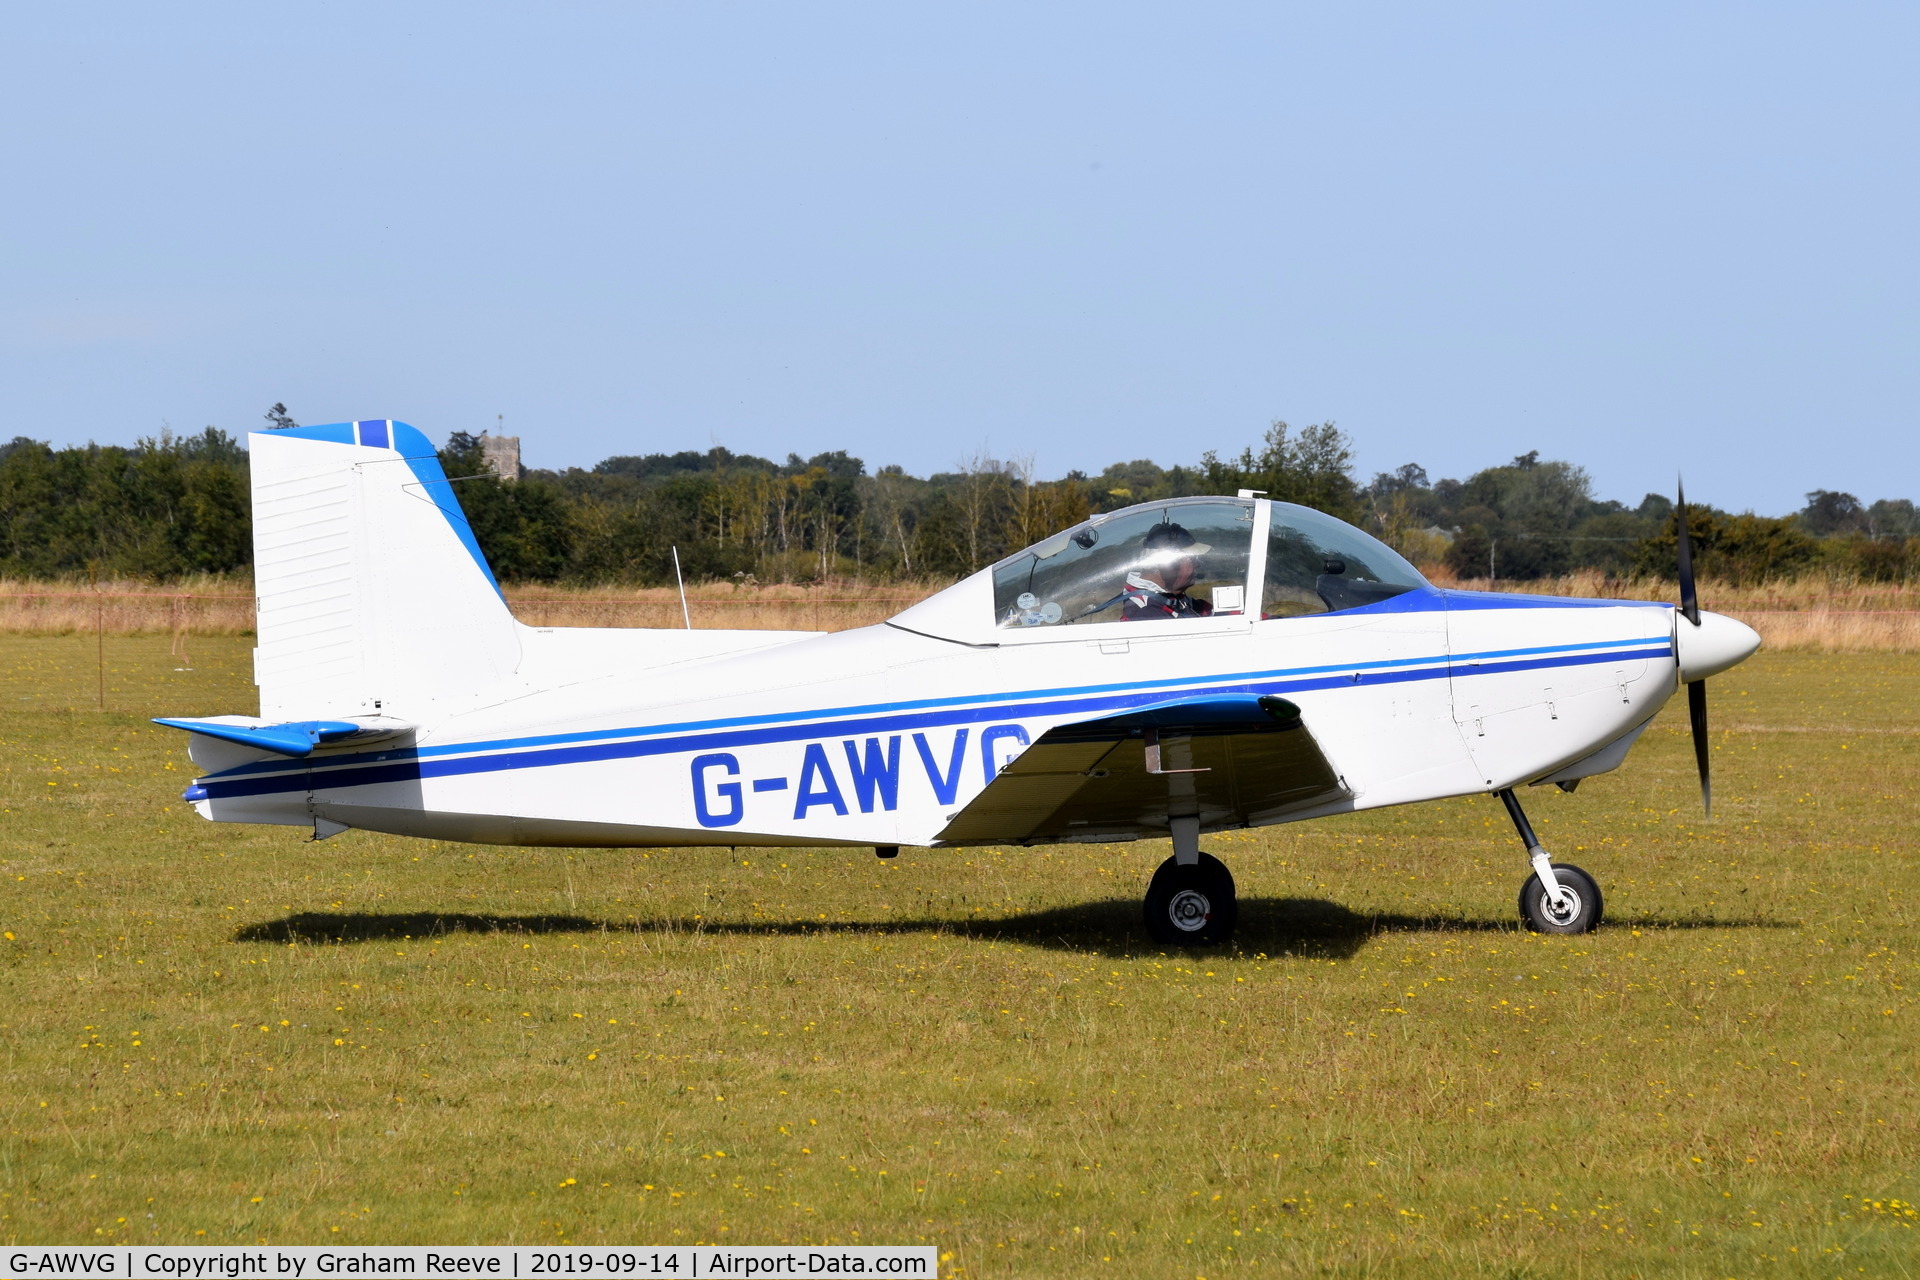 G-AWVG, 1969 AESL Glos-Airtourer 115/T2 C/N 513, Departing from, Bury St Edmunds, Rougham Airfield, UK.